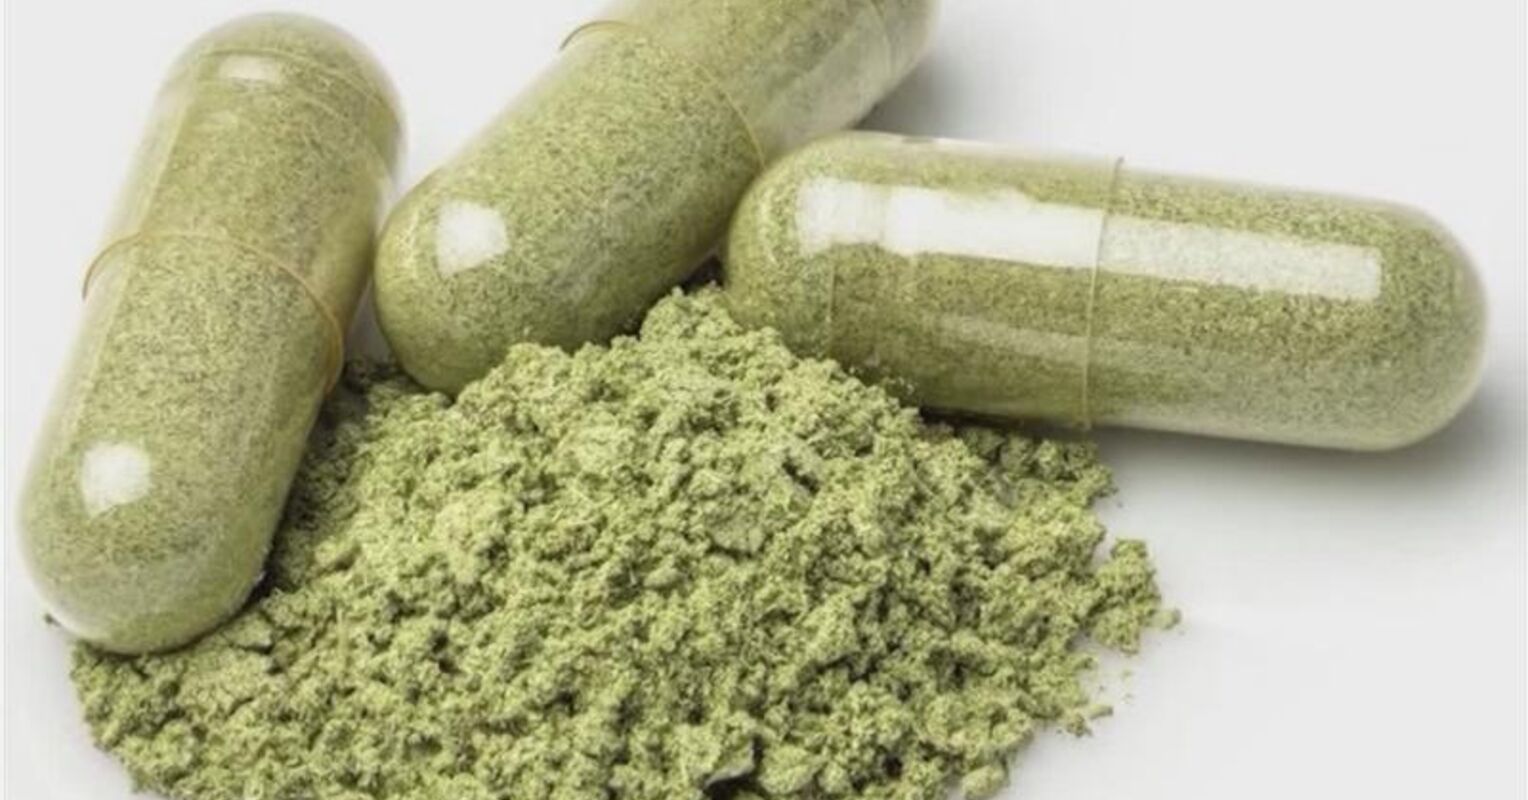 What Is Kratom? Why Is It Being Used for Opiate Self-Detox? | Psychology Today